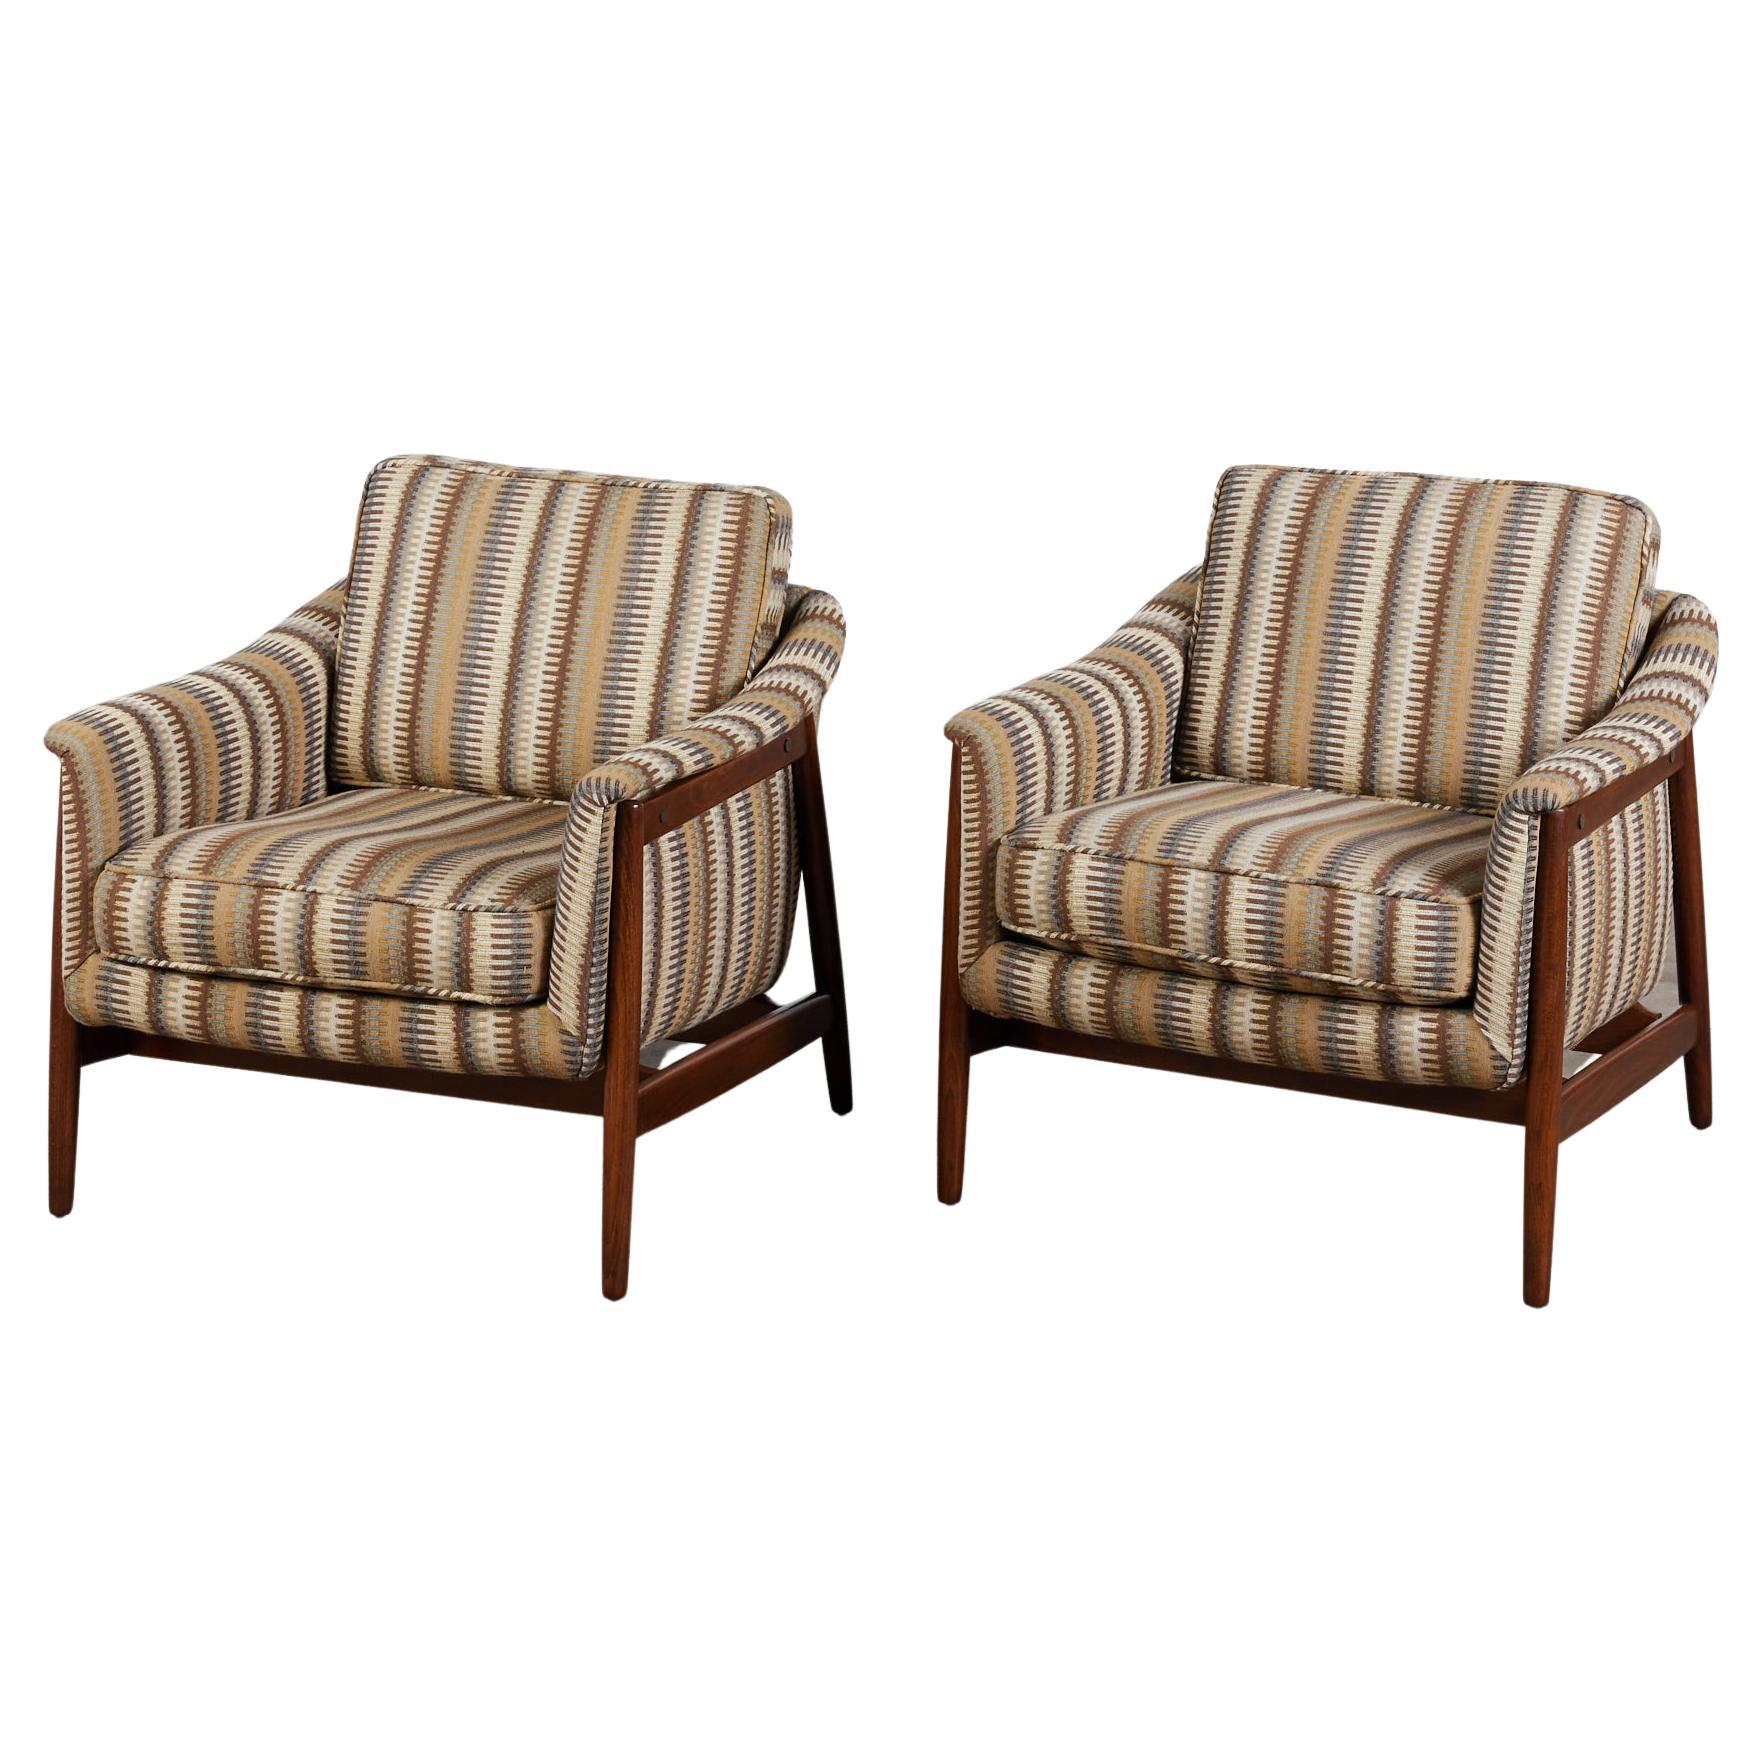 Pair of Folke Ohlsson Lounge Chairs for DUX